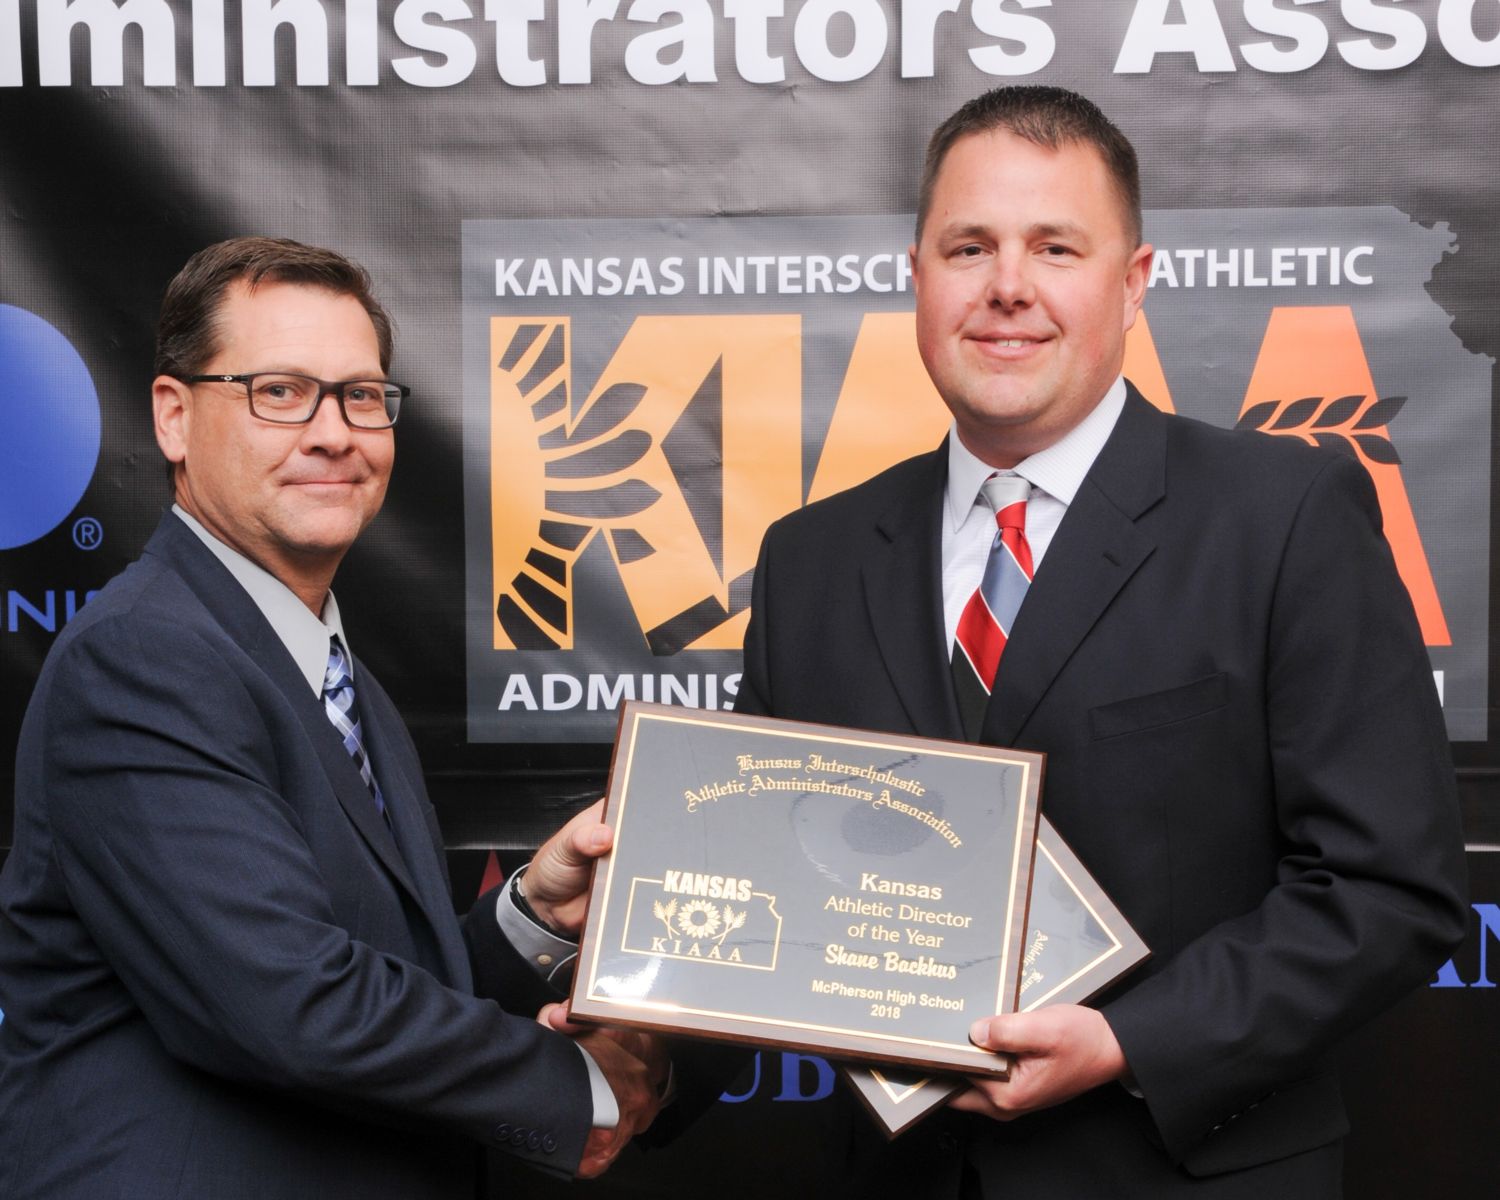 Shane Backhus - District 1 and AD of the Year